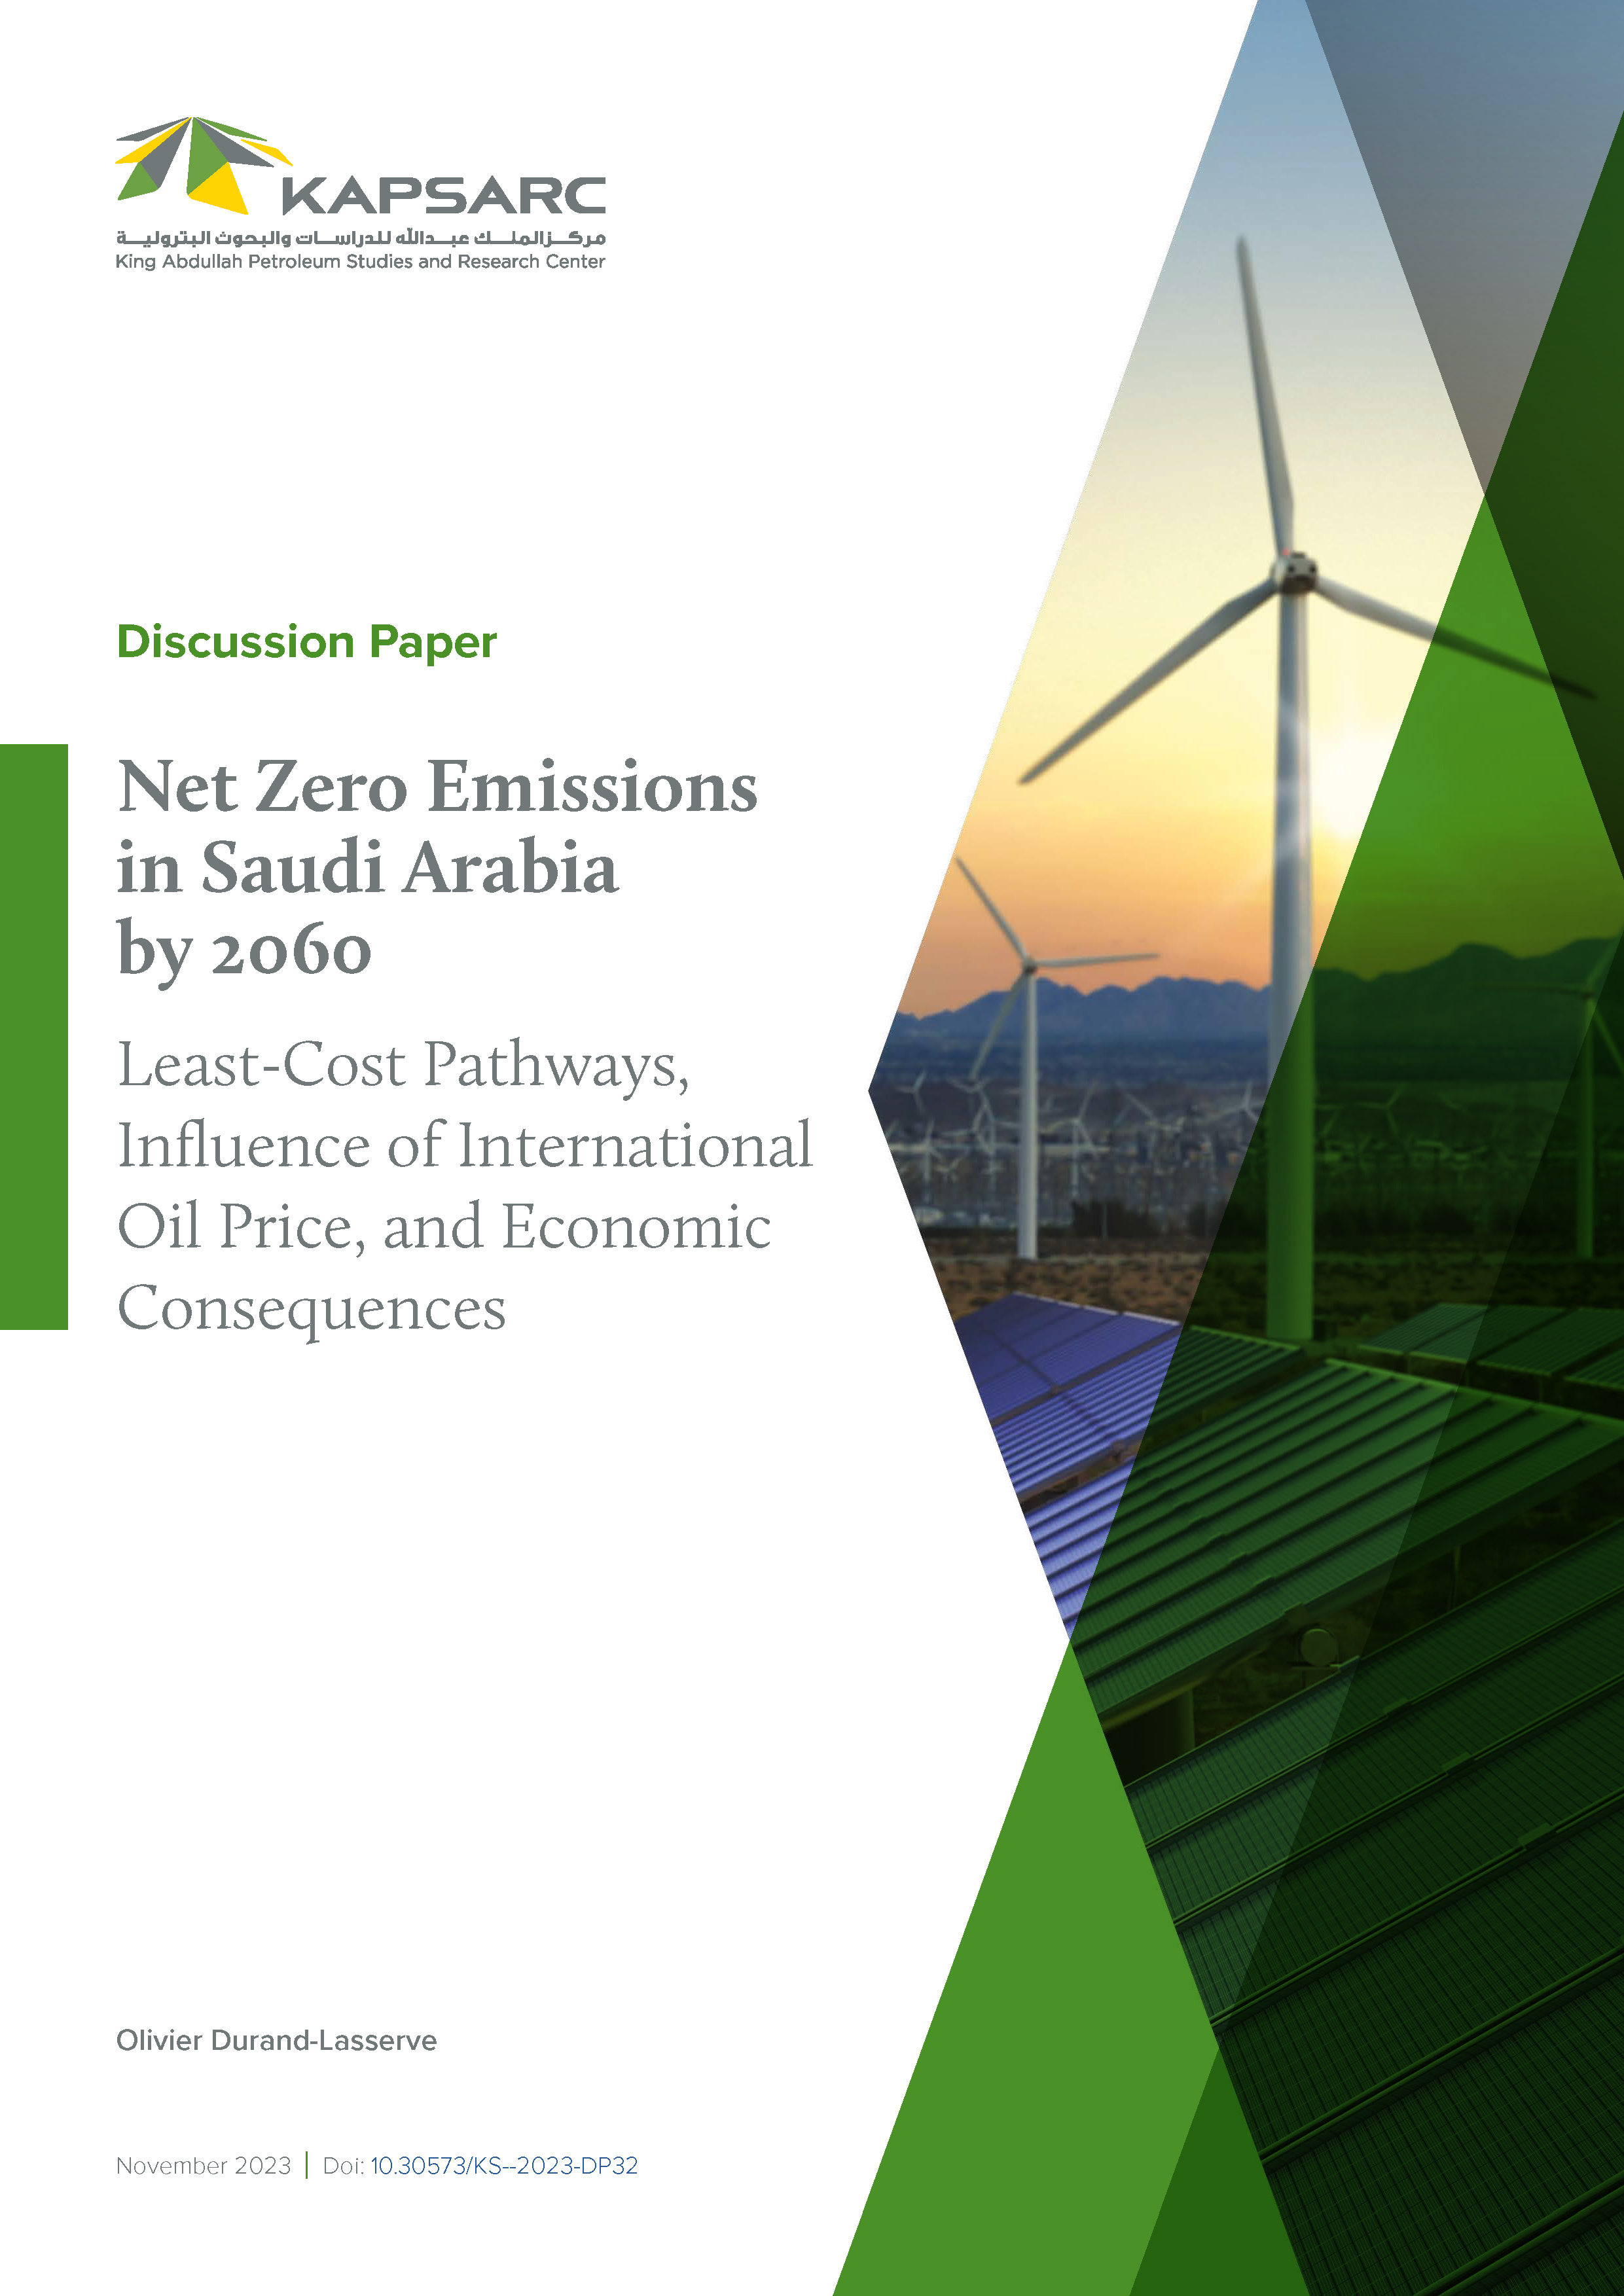 Net Zero Emissions in Saudi Arabia by 2060: Least-Cost Pathways, Influence of International Oil Price, and Economic Consequences